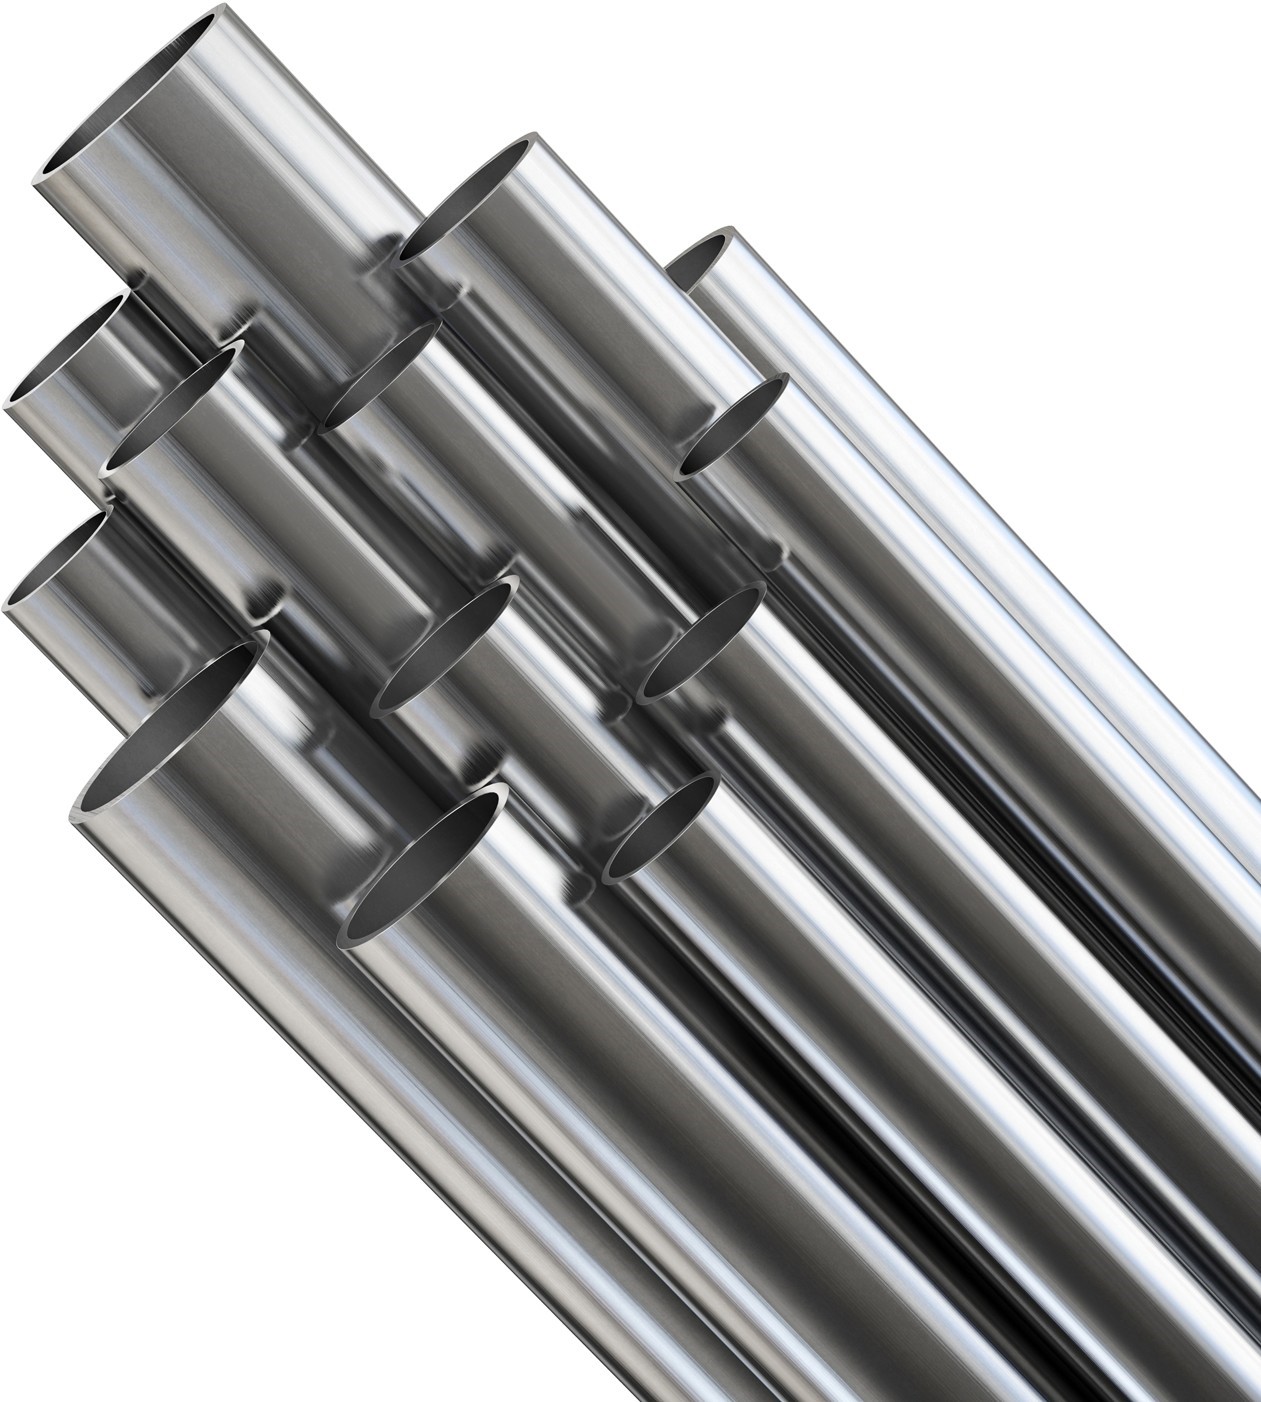 Steel Pipes Image